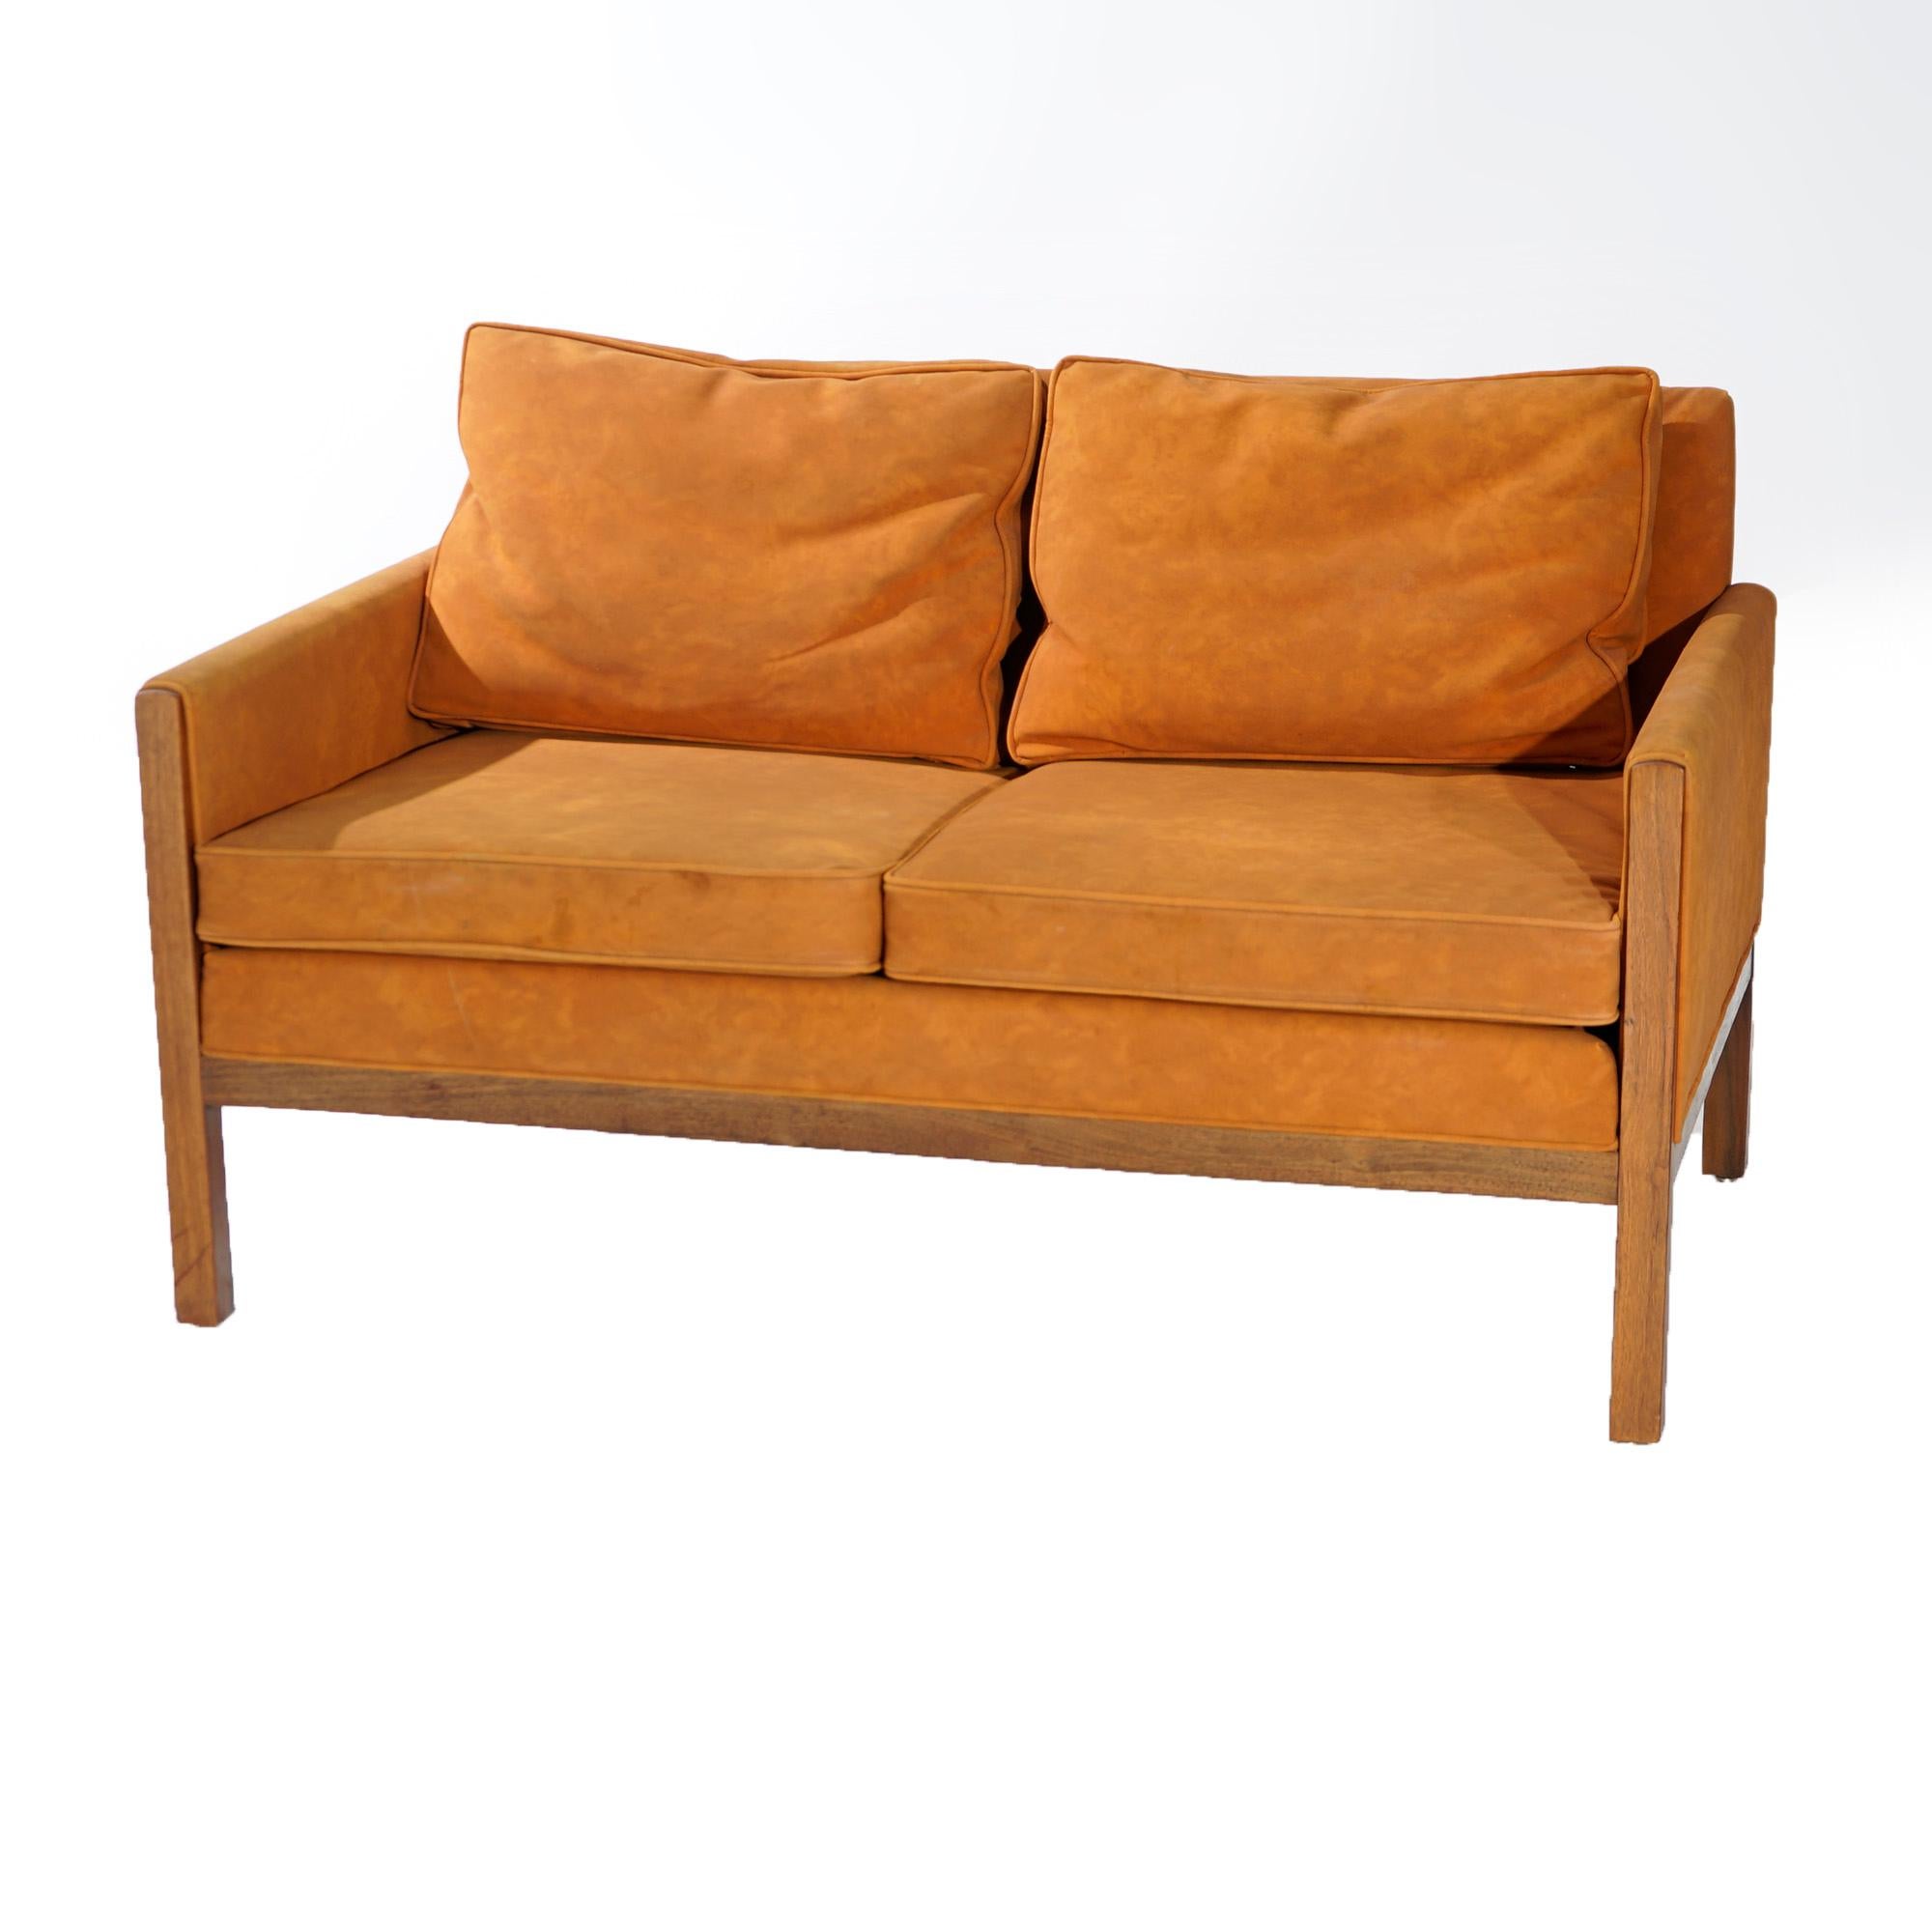 A Mid Century Danish Modern seating set by Thomasville includes settee and chair and offers walnut frame with leatherette upholstered seats, backs and arms, Founders as labeled, 20th century

Measures- chair 31.25''H x 27.25''W x 32''D; settee 30''H